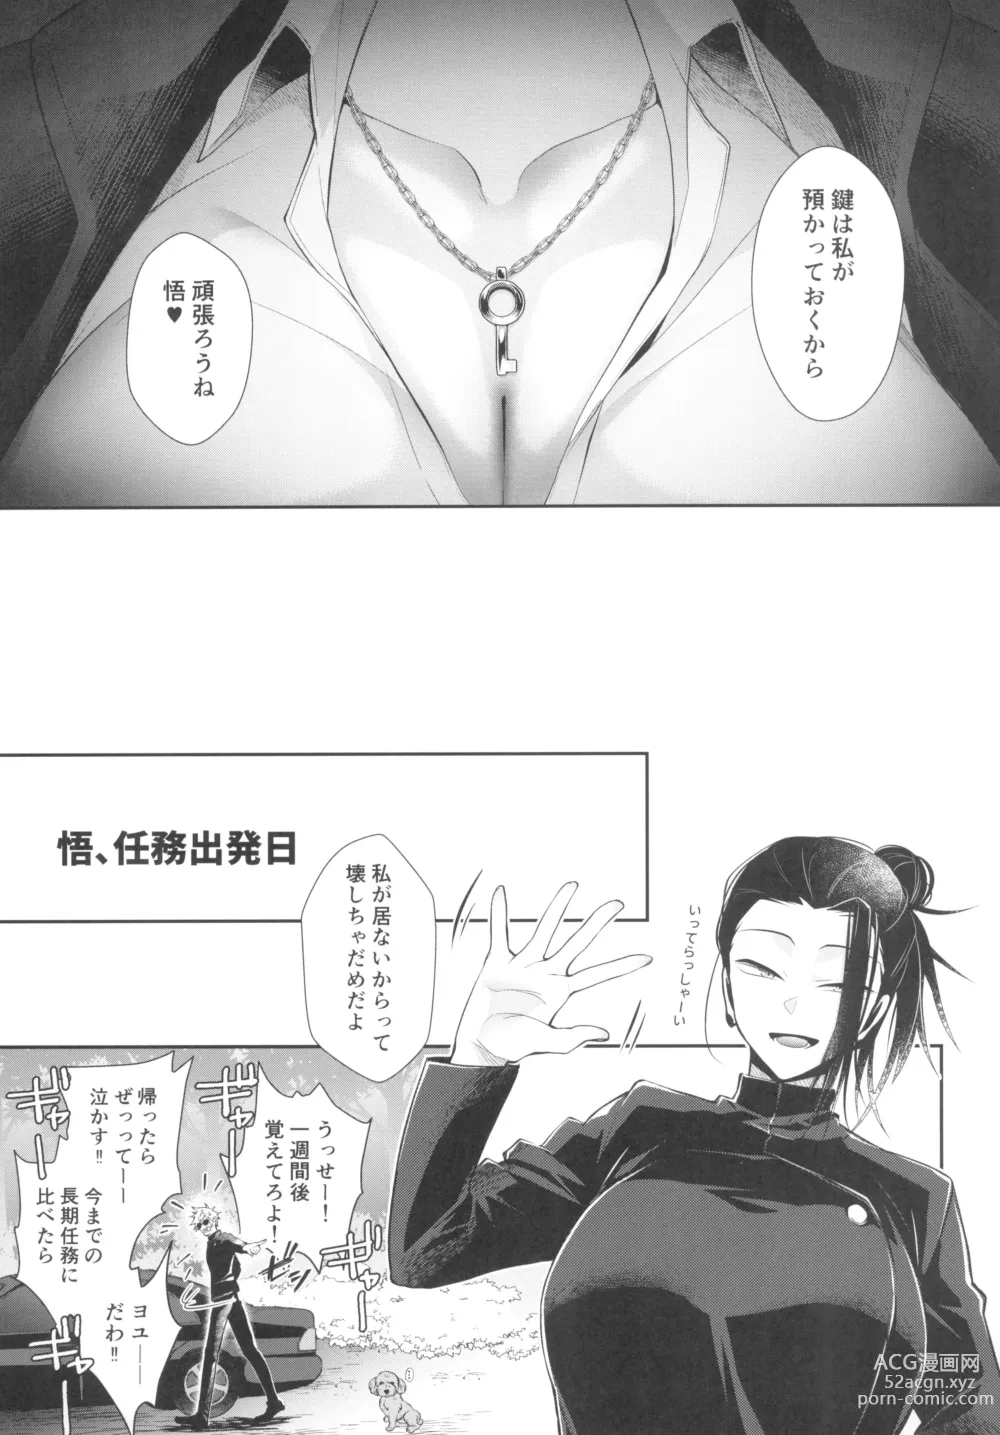 Page 7 of doujinshi Love Control